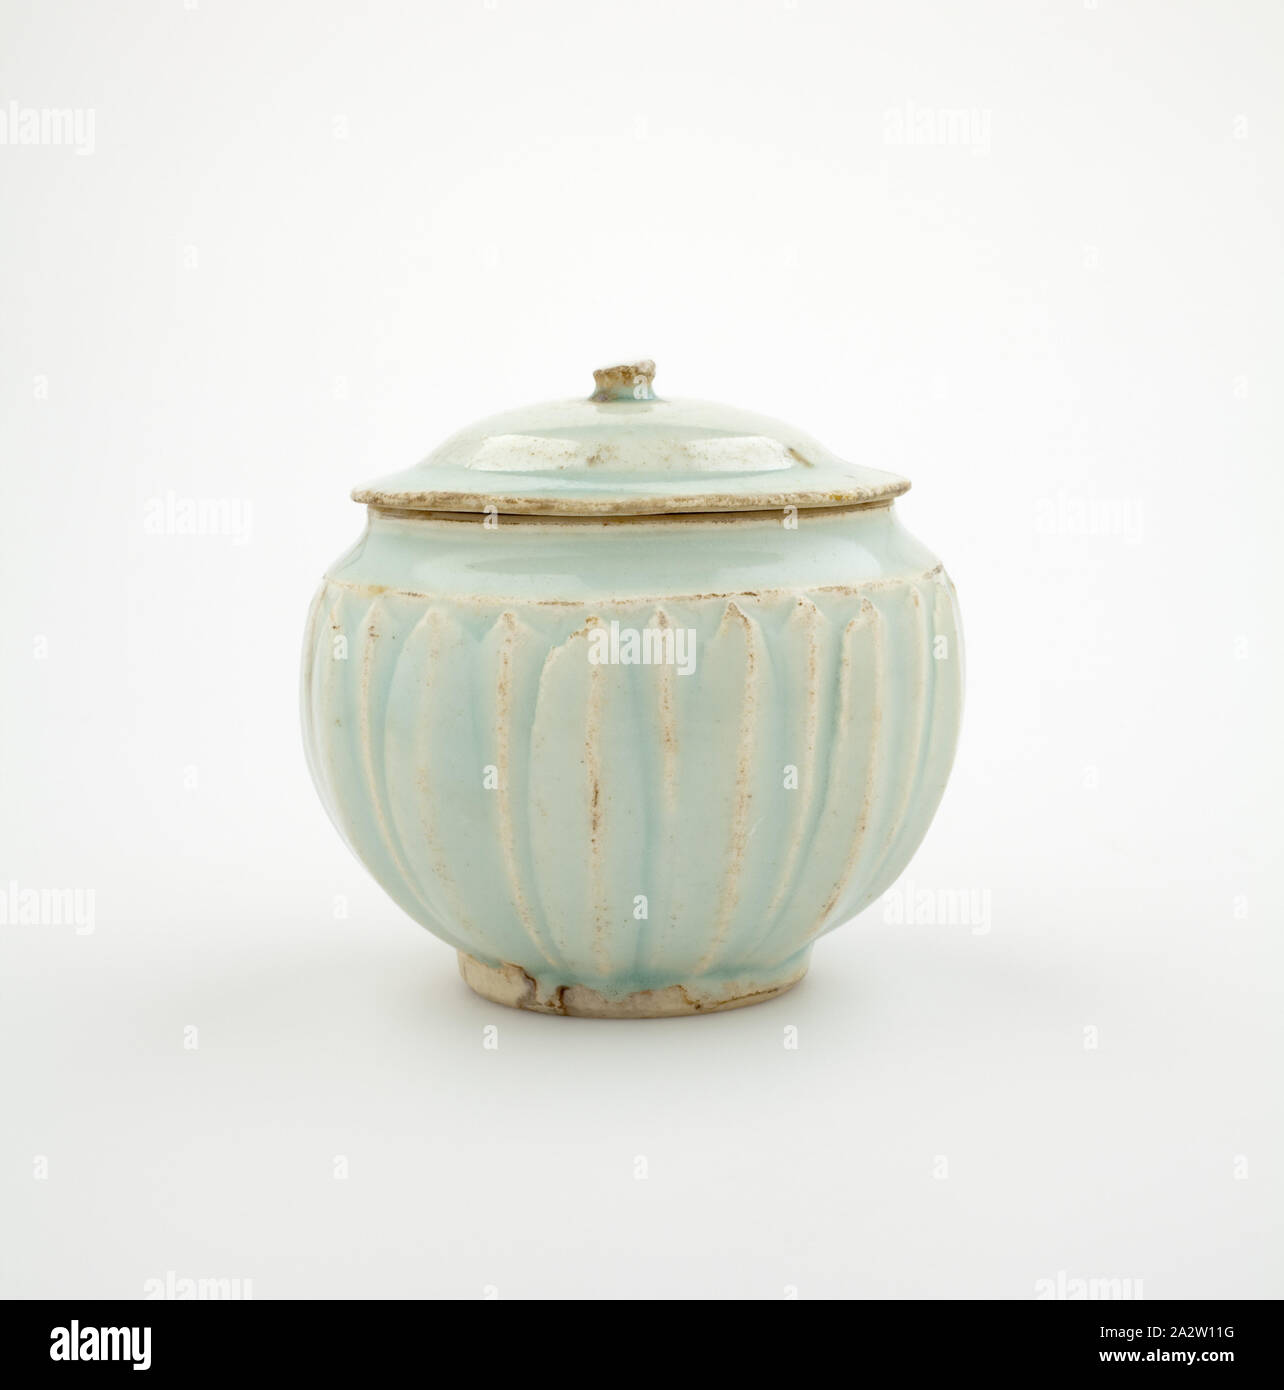 jar with cover, Southern Song dynasty, Southern Song dynasty, 1100s, porcelain with bluish-white glaze, 3-3/4 x 2-7/8 in., Asian Art Stock Photo